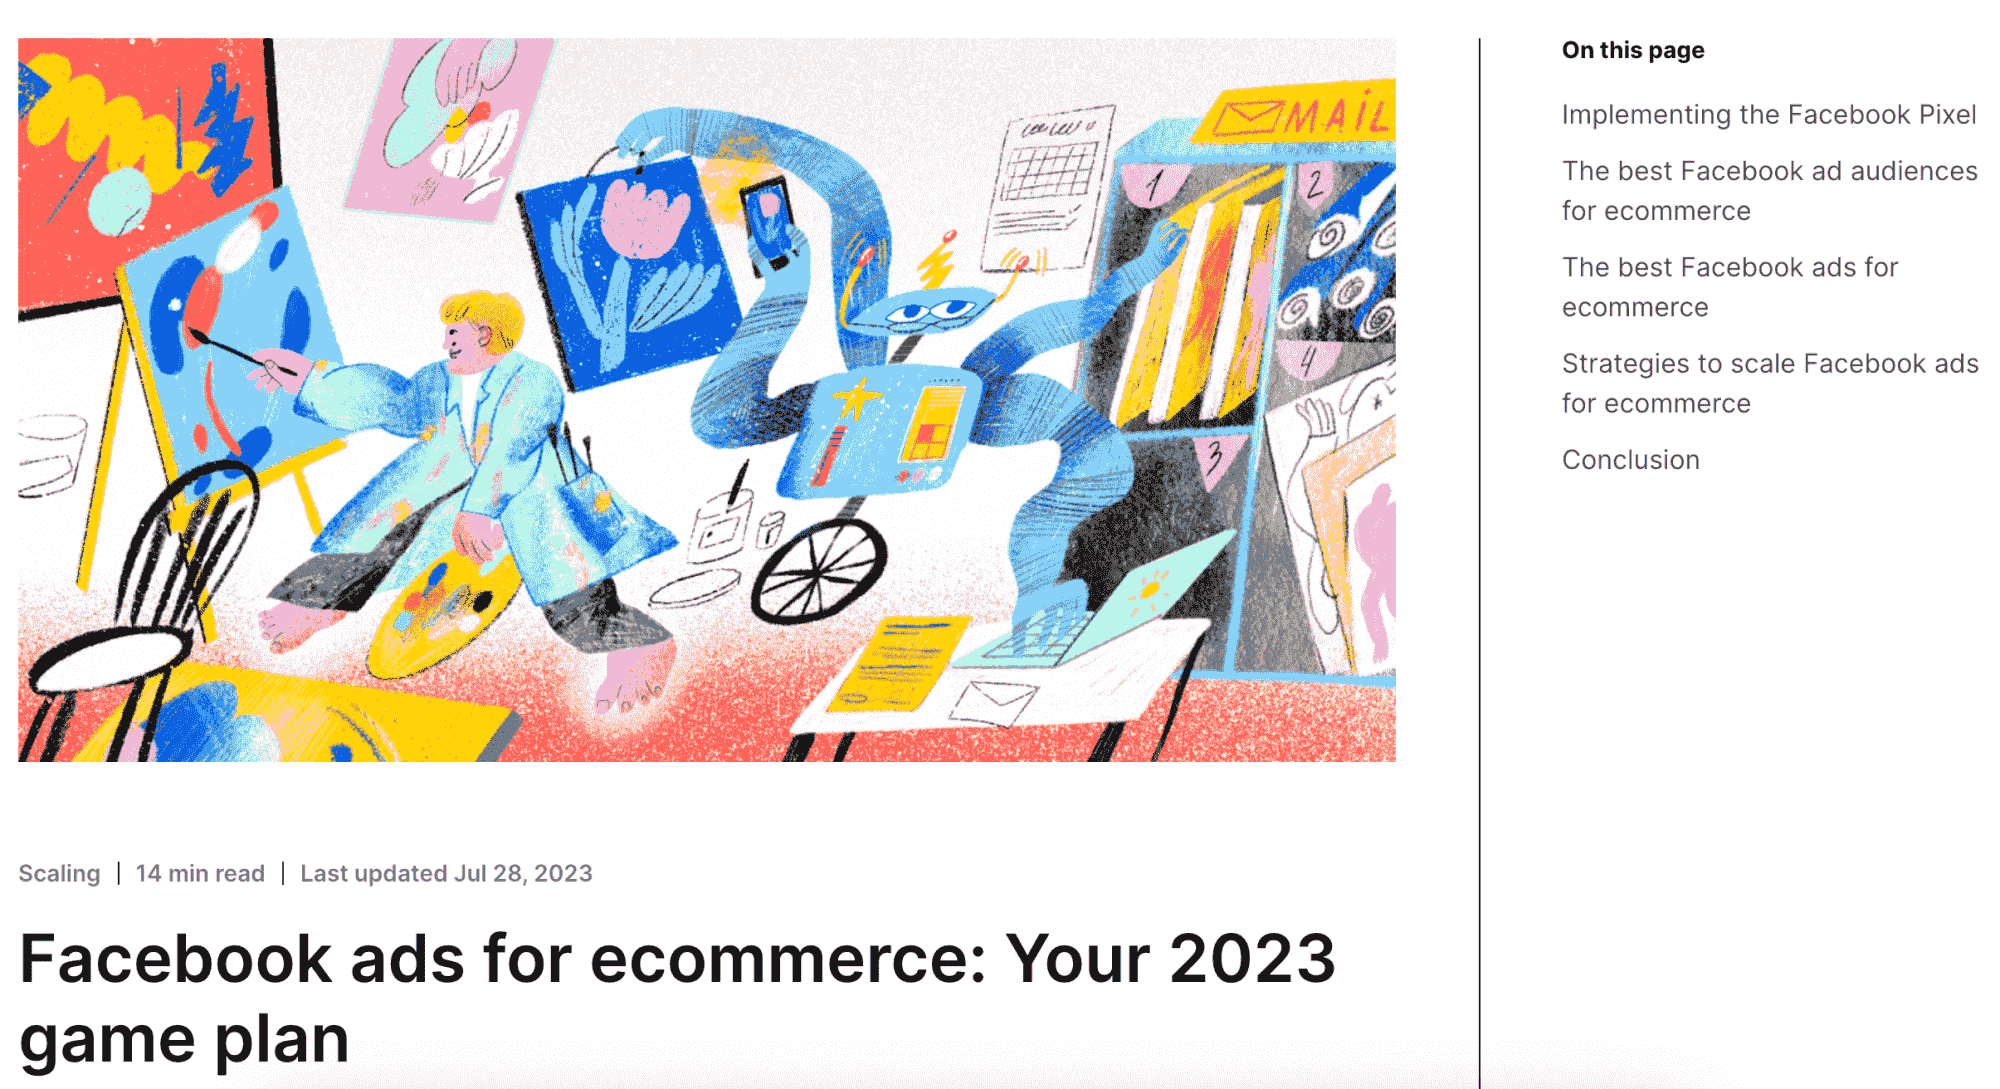 Facebook ads for ecommerce: Your 2023 game plan